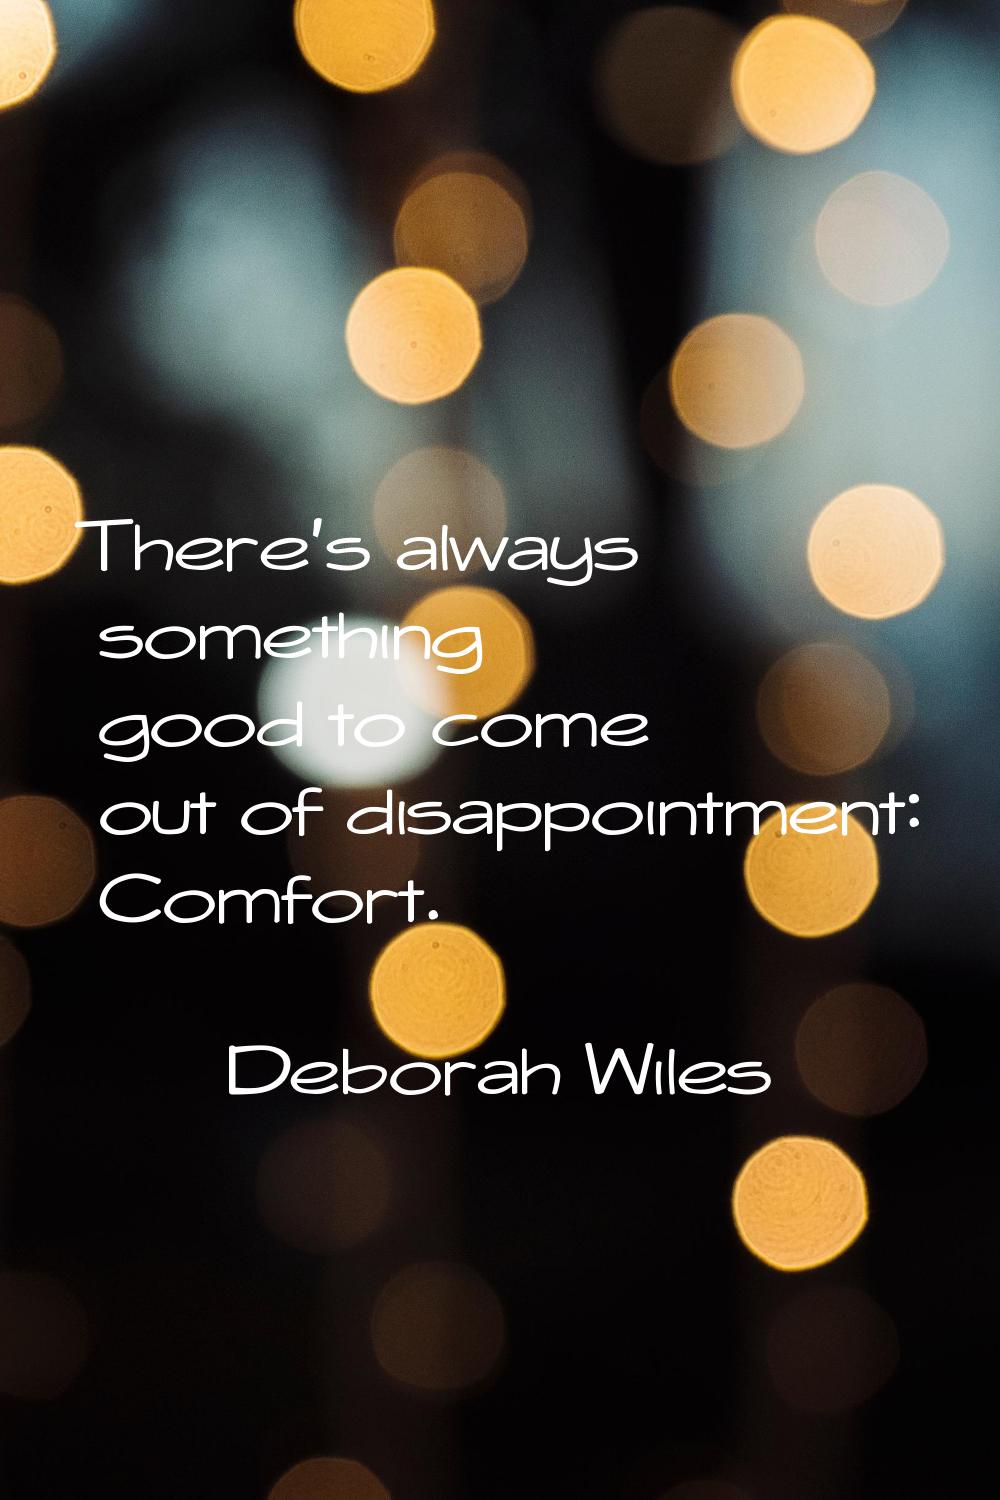 There's always something good to come out of disappointment: Comfort.